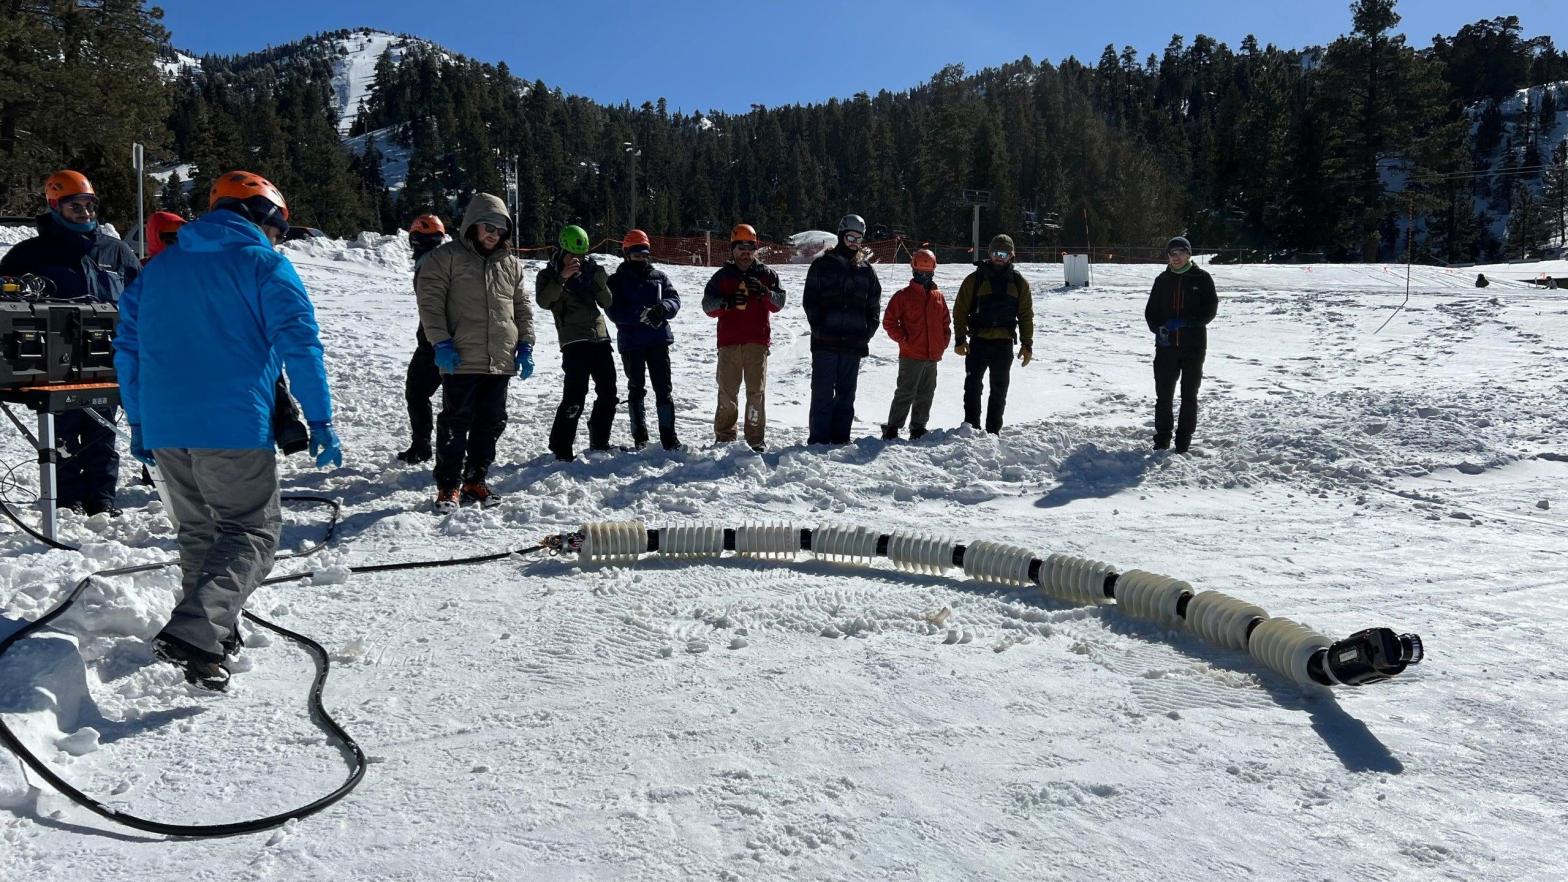 Team members testing out the snake robot named EELS at a ski resort in Southern California in February. (Photo: NASA/JPL-Caltech)